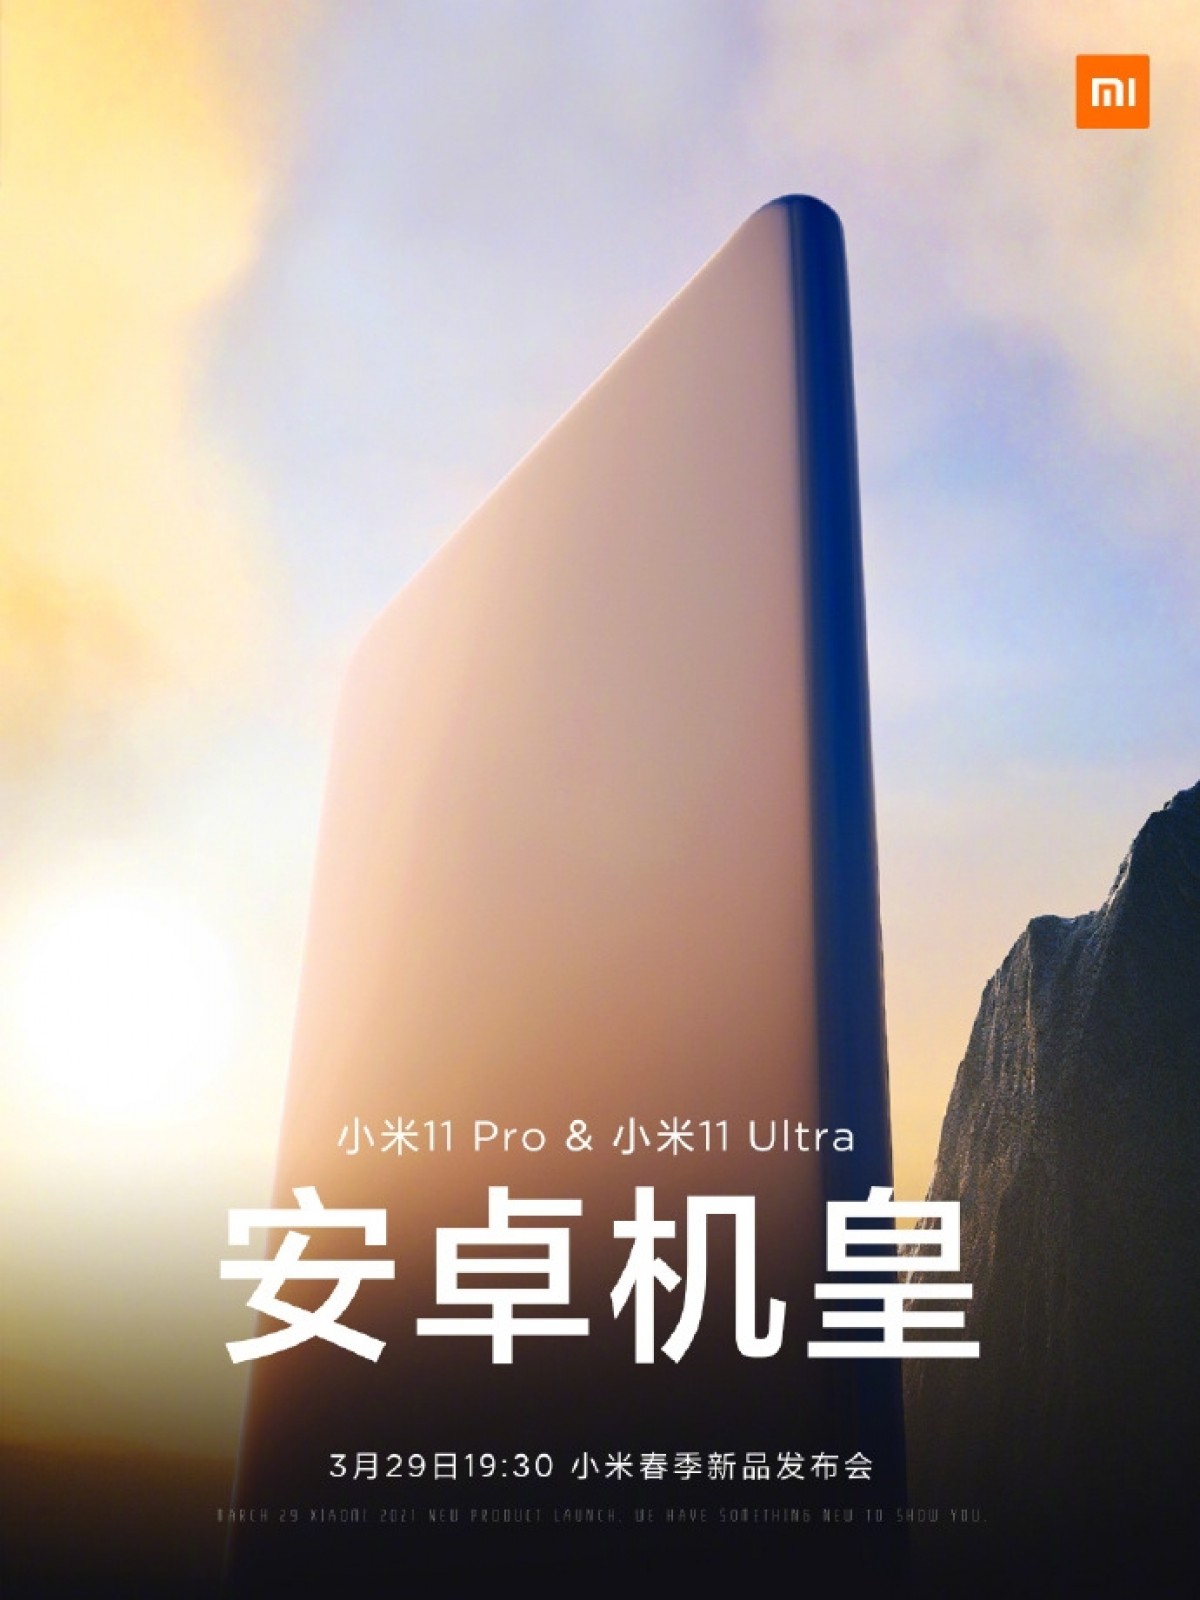 Xiaomi confirms arrival of Mi 11 Pro and Mi 11 Ultra at March 29 event